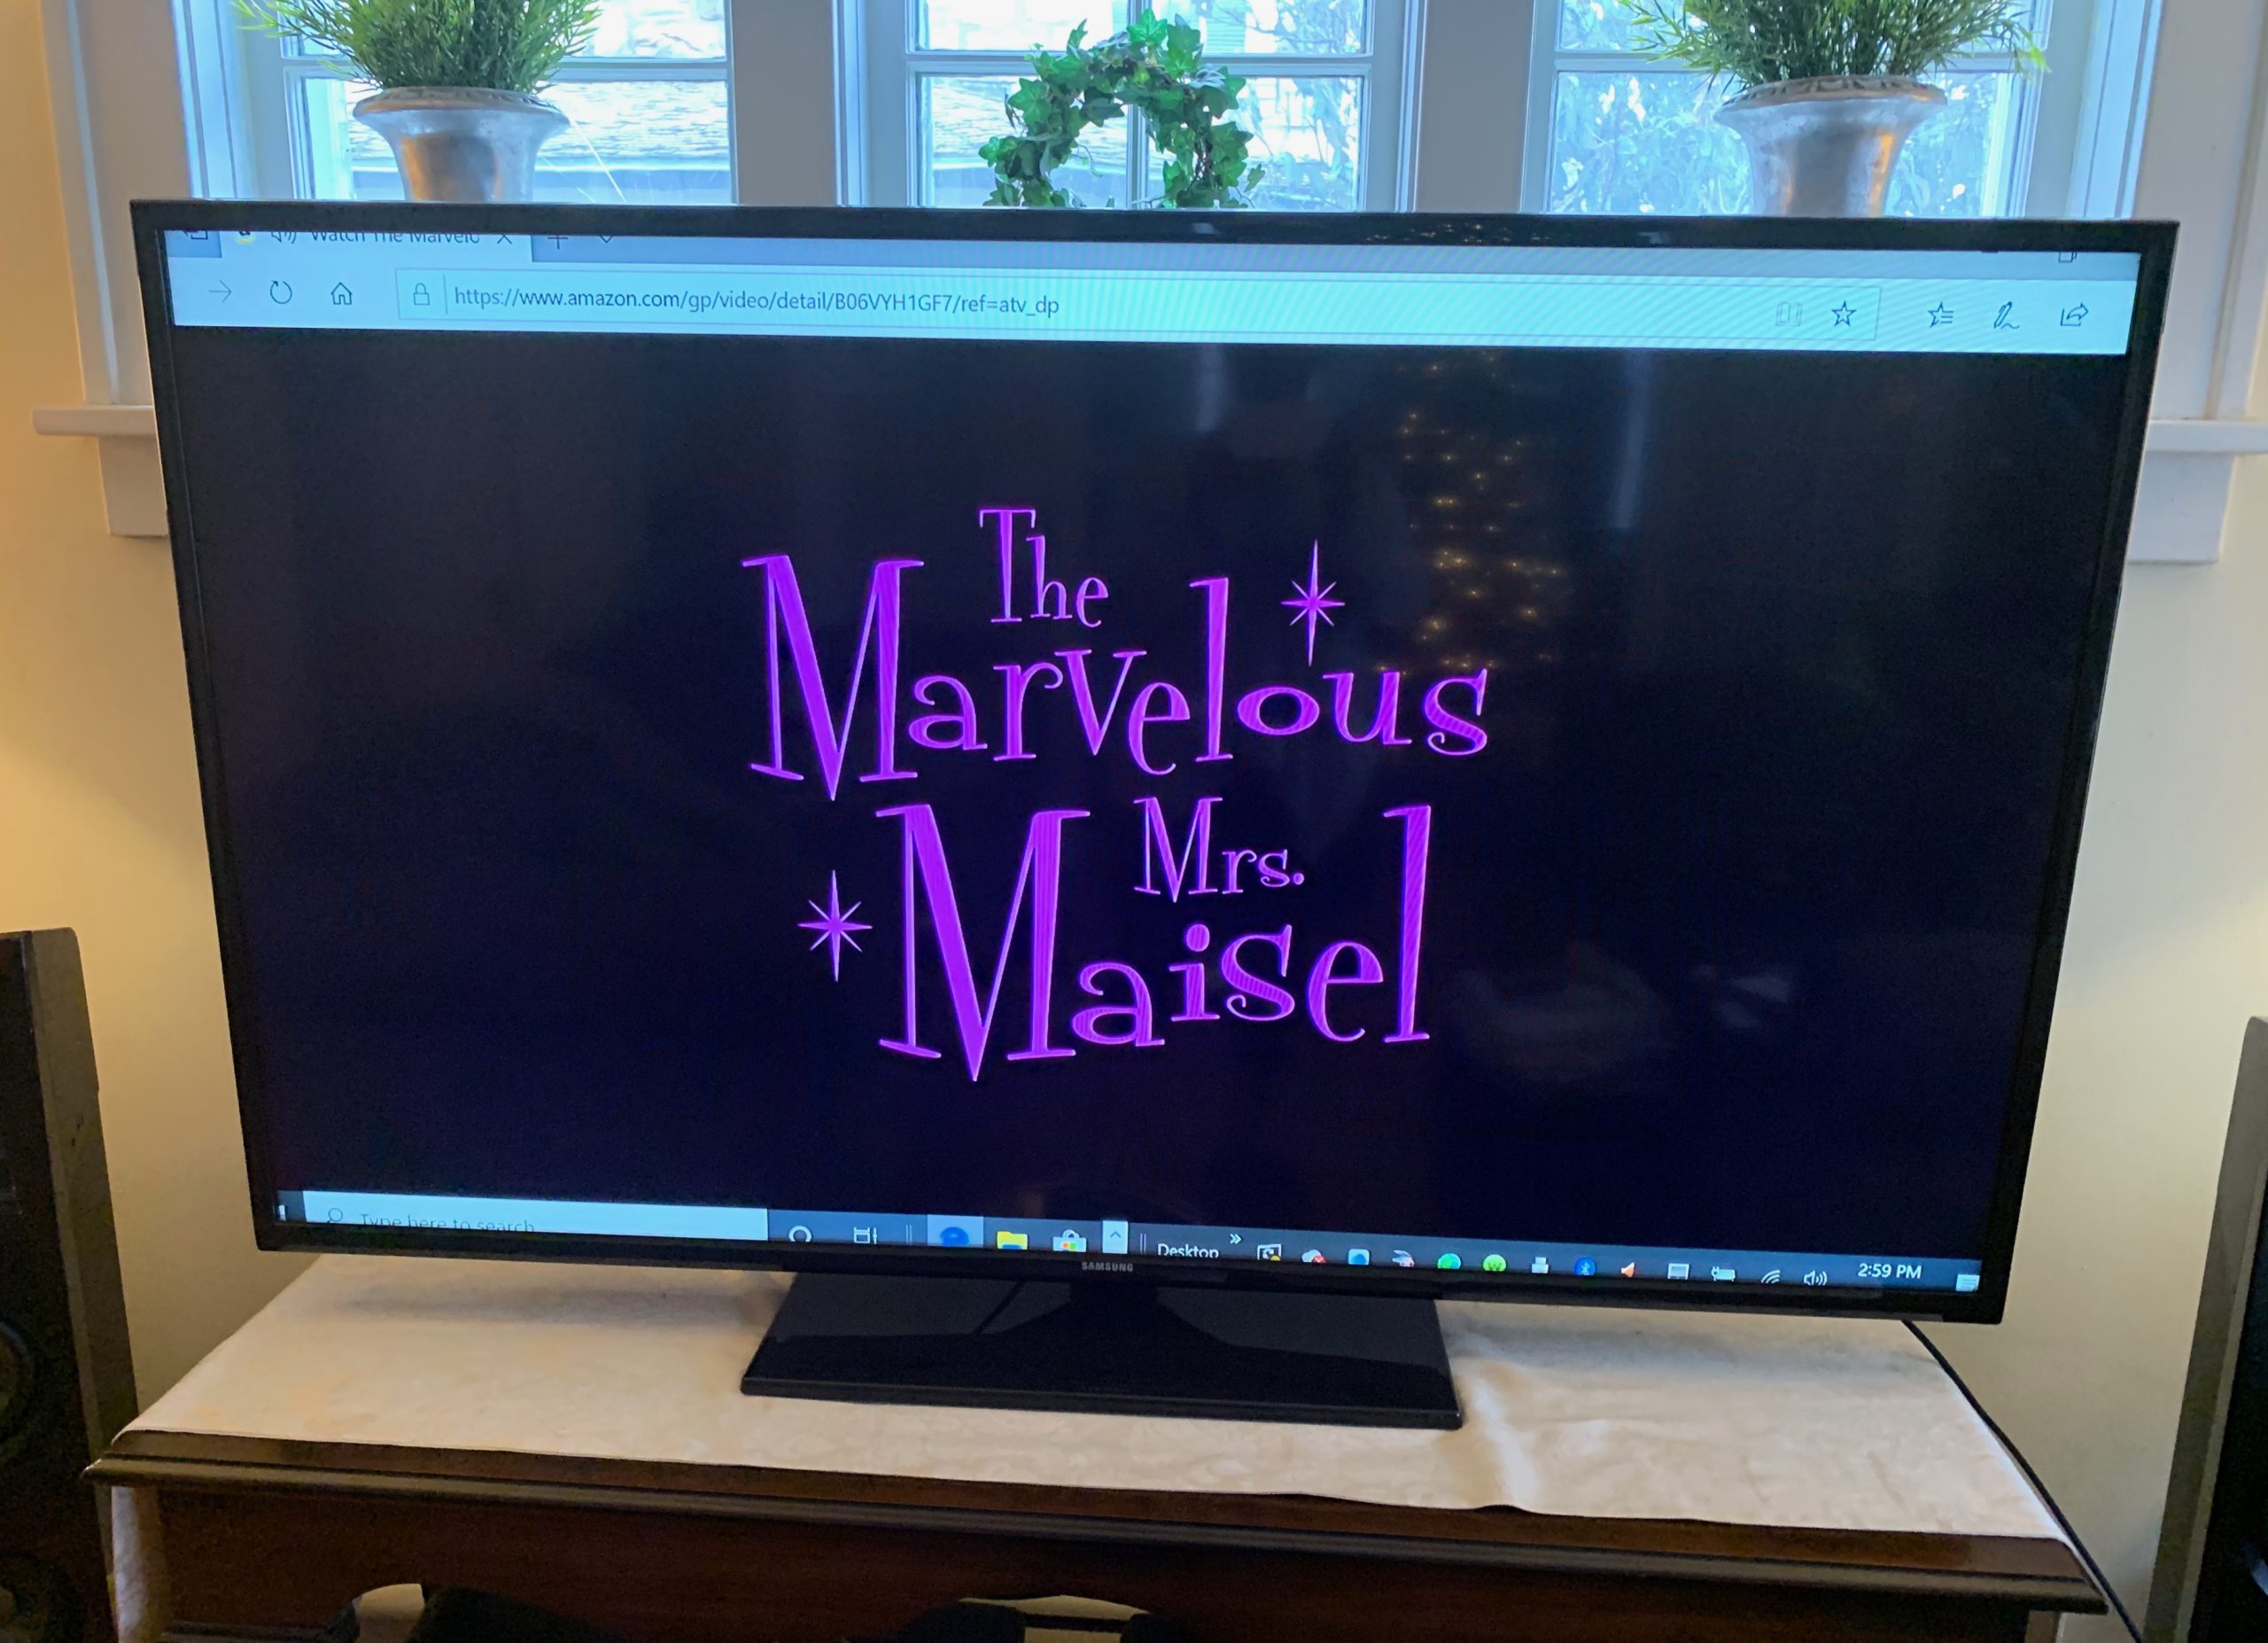 At Home watching The Marvelous Mrs. Maisel